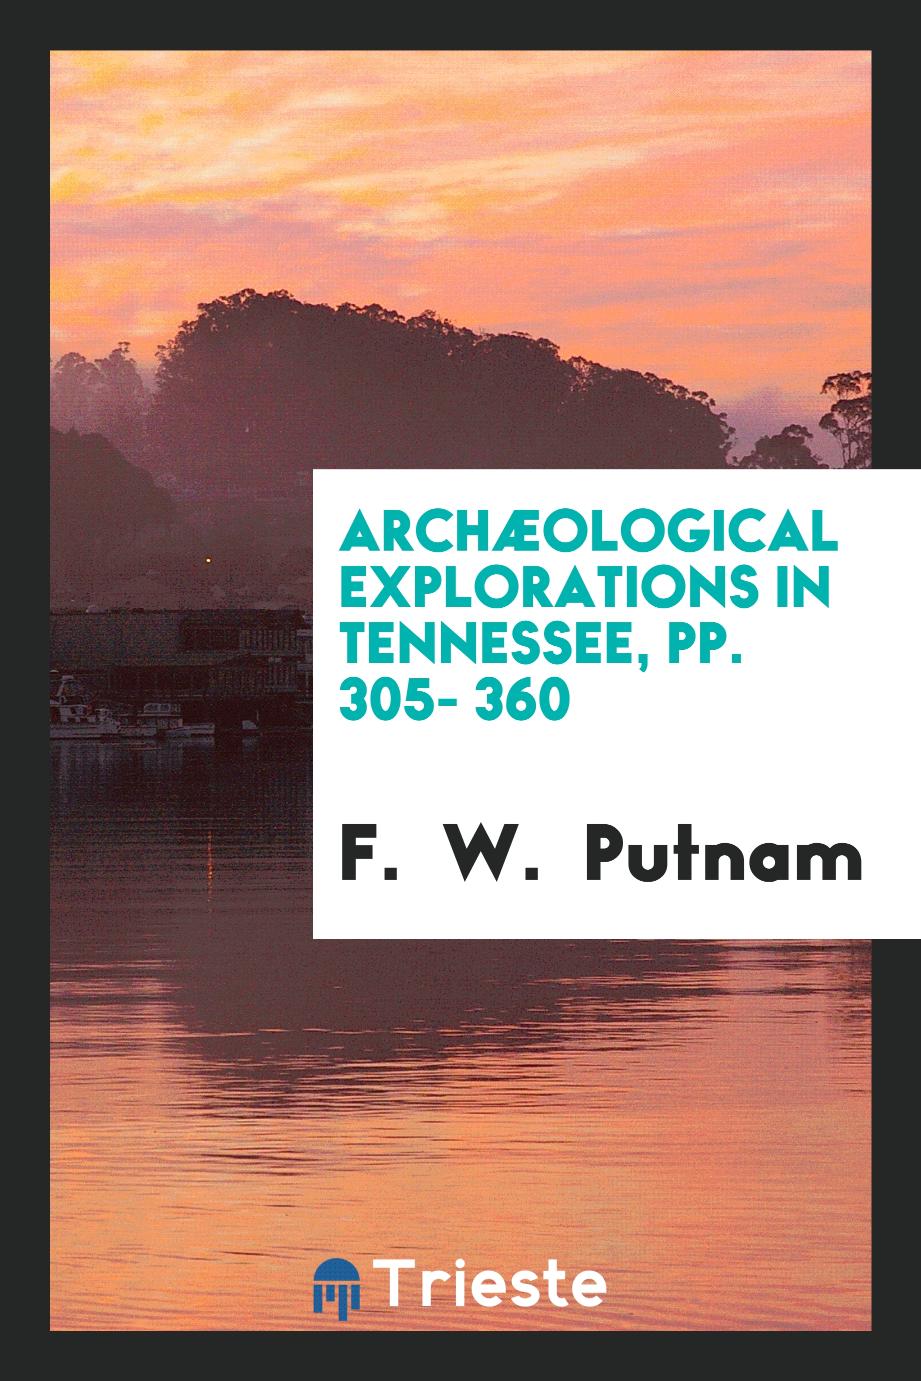 Archæological Explorations in Tennessee, pp. 305- 360